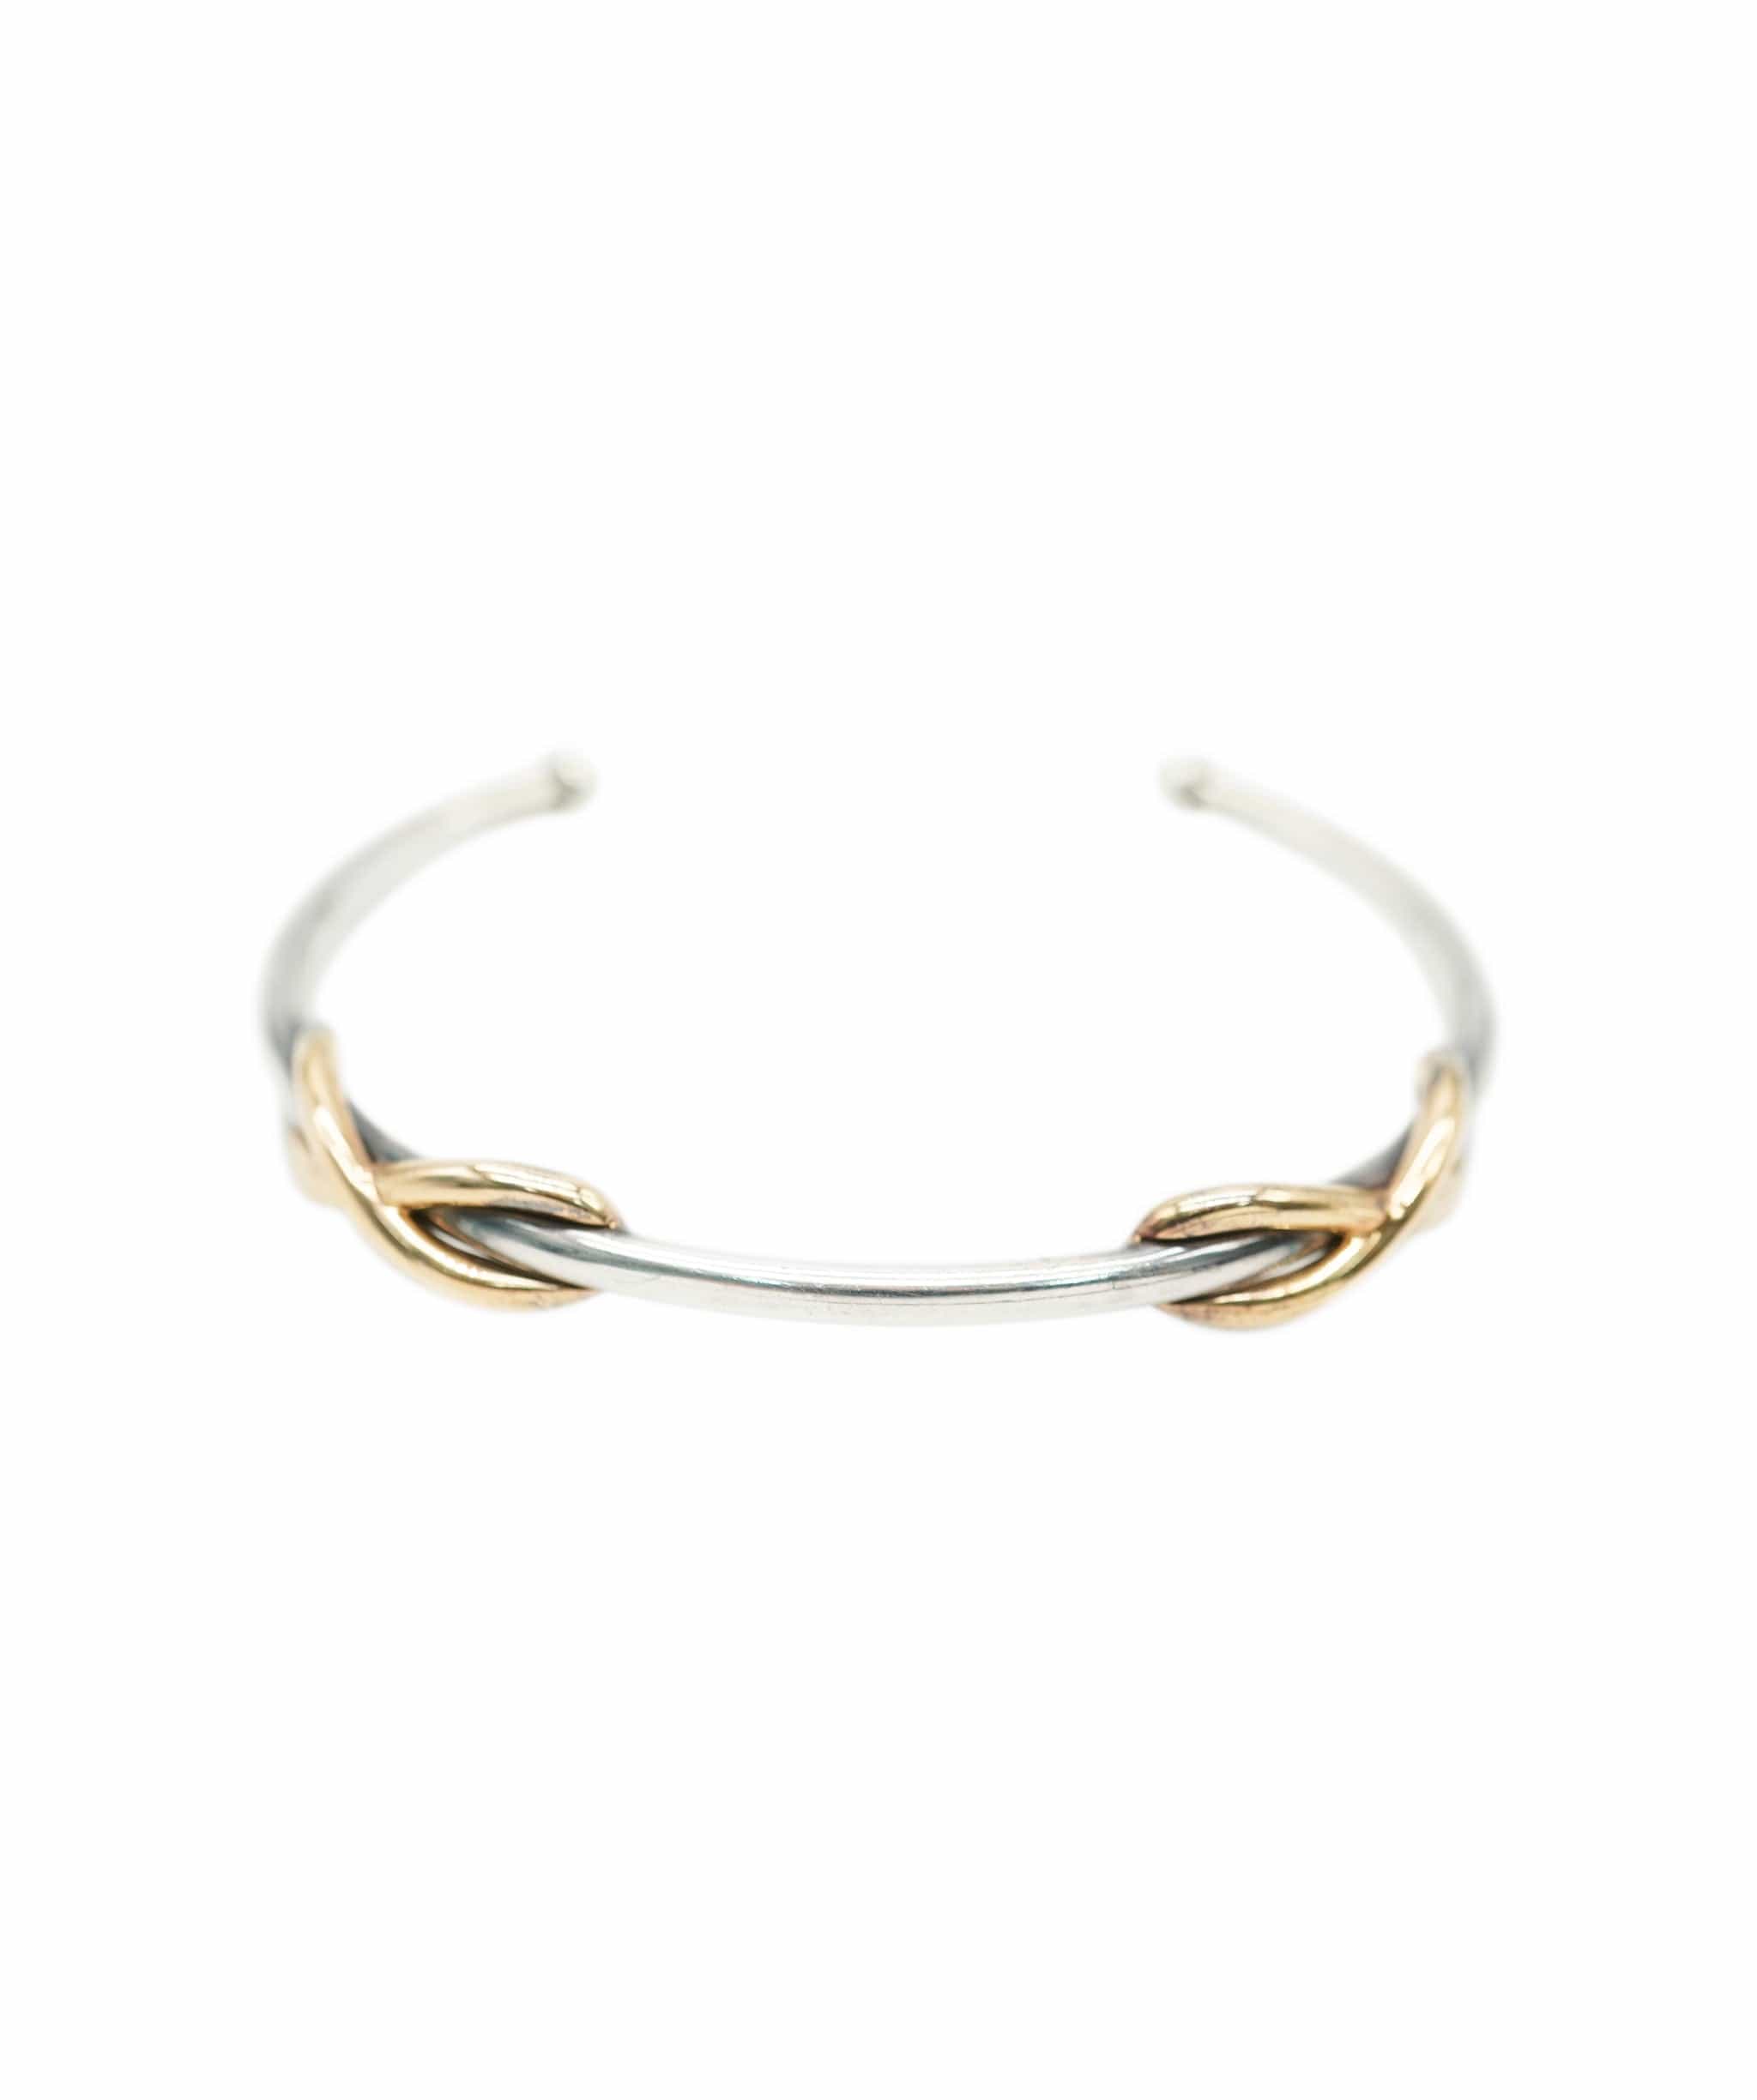 Tiffany & Co. Tiffany & Co. Yellow Gold & Sterling Silver Double Infinity Cuff Bracelet ABC0774